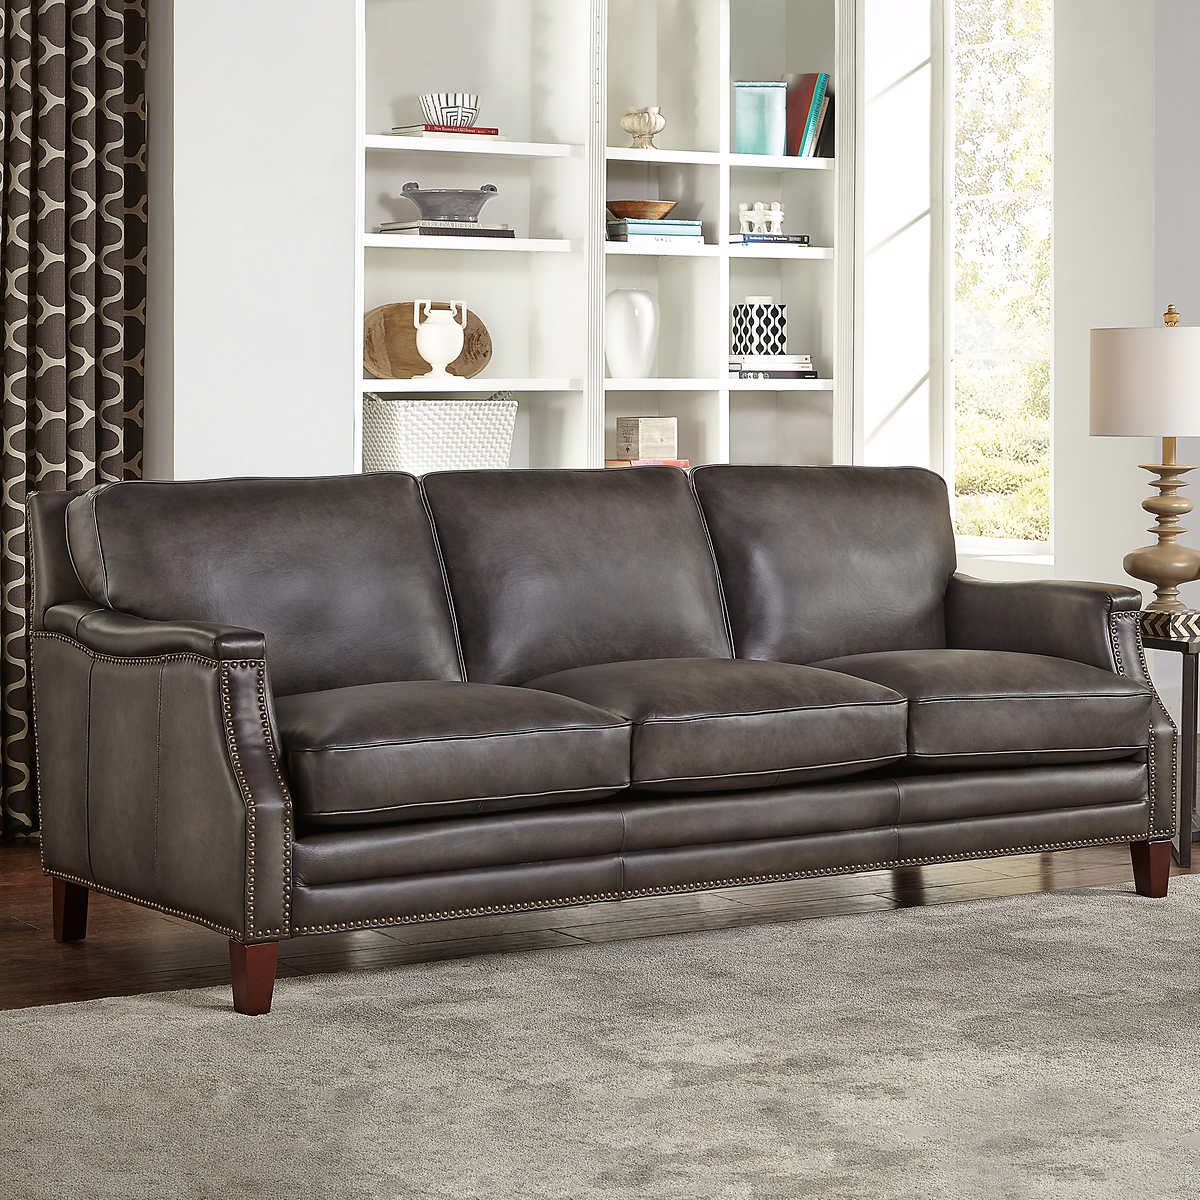 Edgewood Top Grain Leather Sofa Costco, Top Grain Leather Couch Set